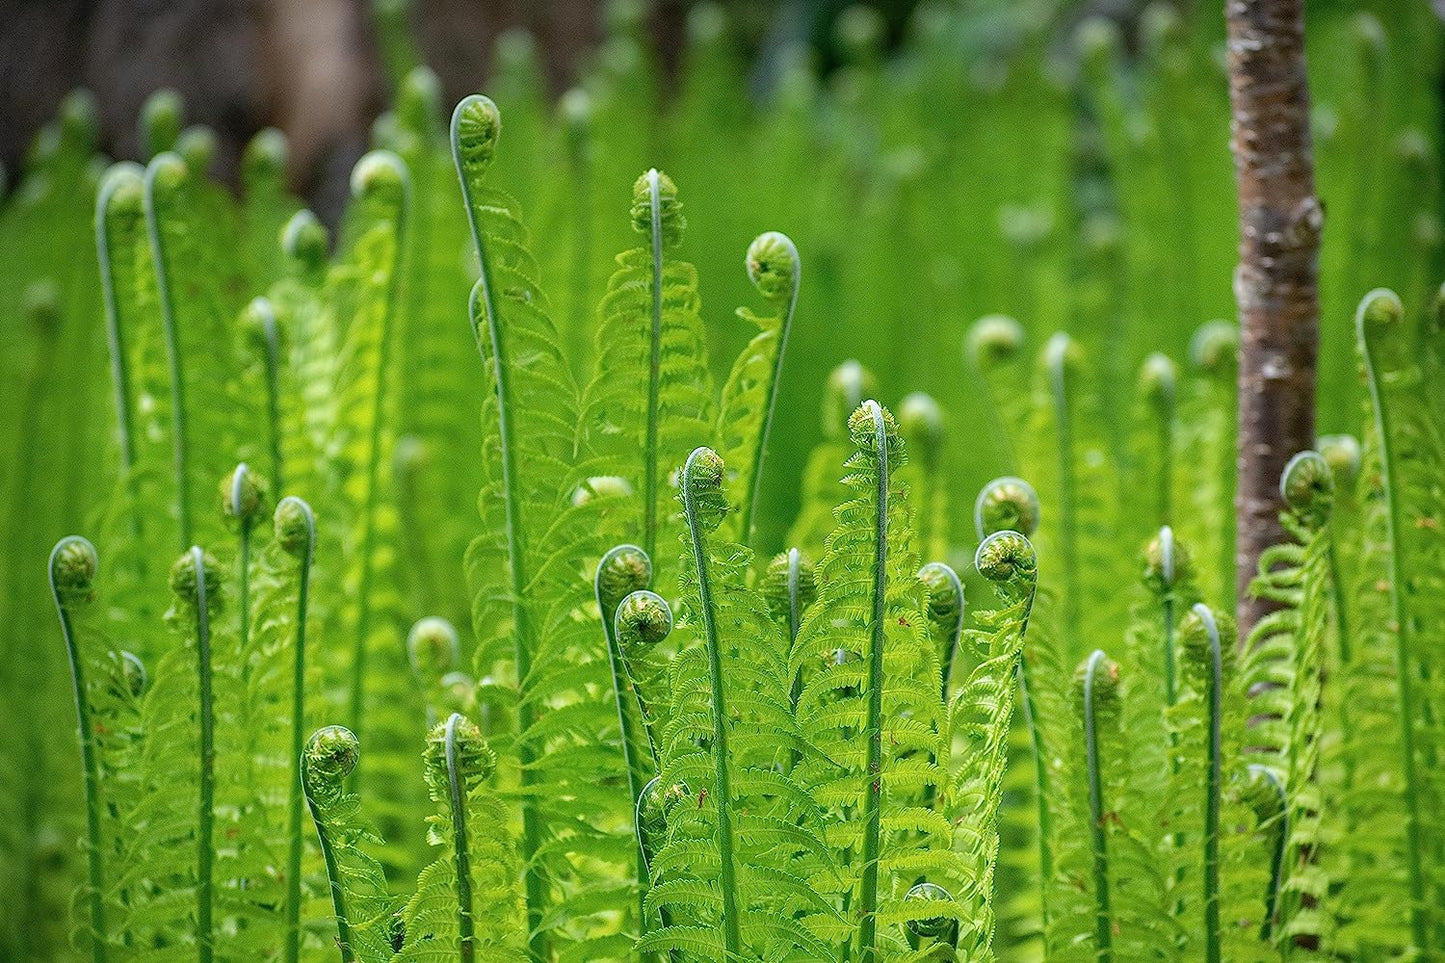 Hundredfold Ostrich Fern 1 Small Live Plant – Canada Native Woodland Perennial, Beautiful Foliage, Excellent for Bonsai, Patio, Balcony & Ground Cover